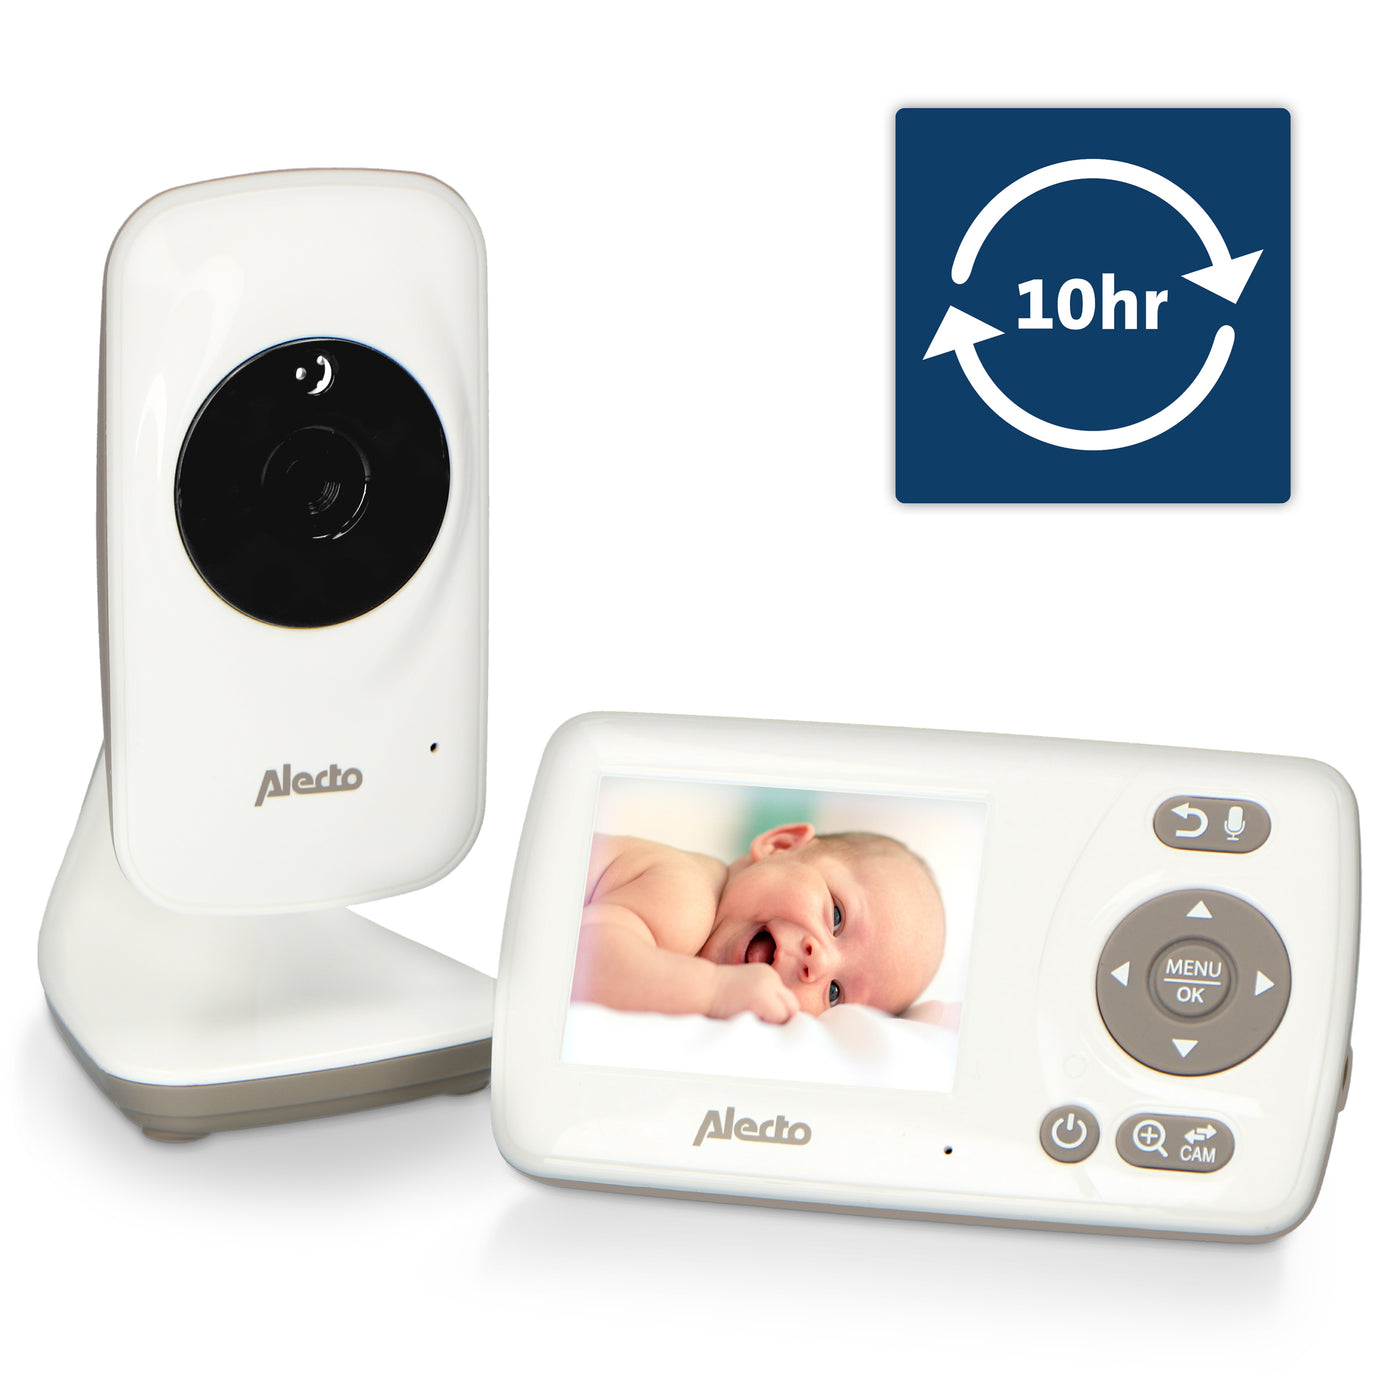 Alecto DVM-71 - Video baby monitor with 2.4" colour display, white/taupe